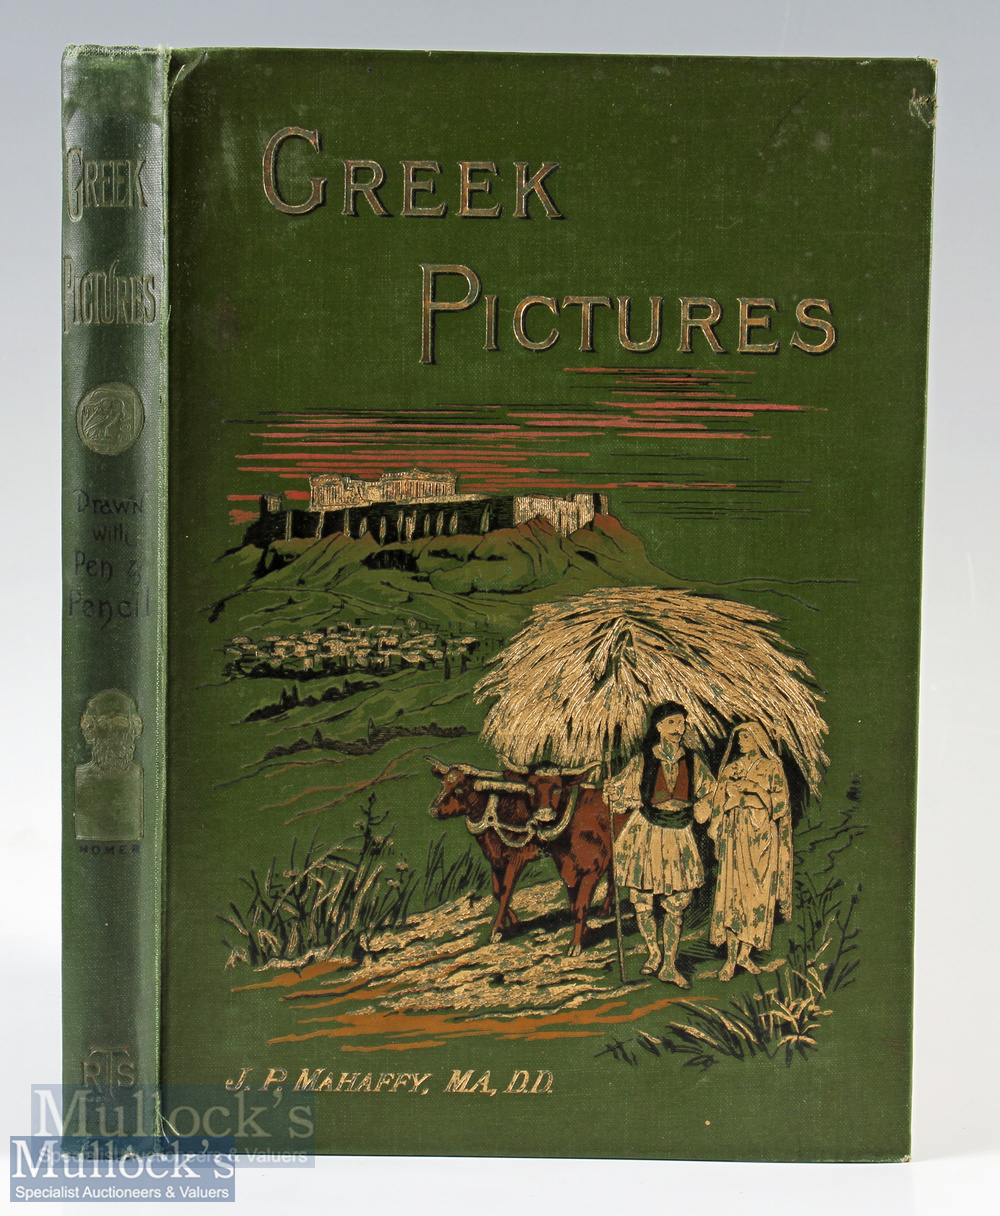 Greece - Greek Pictures Drawn in Pen and Pencil by J P Mahaffy MA 1890s a large pictorial 225 page